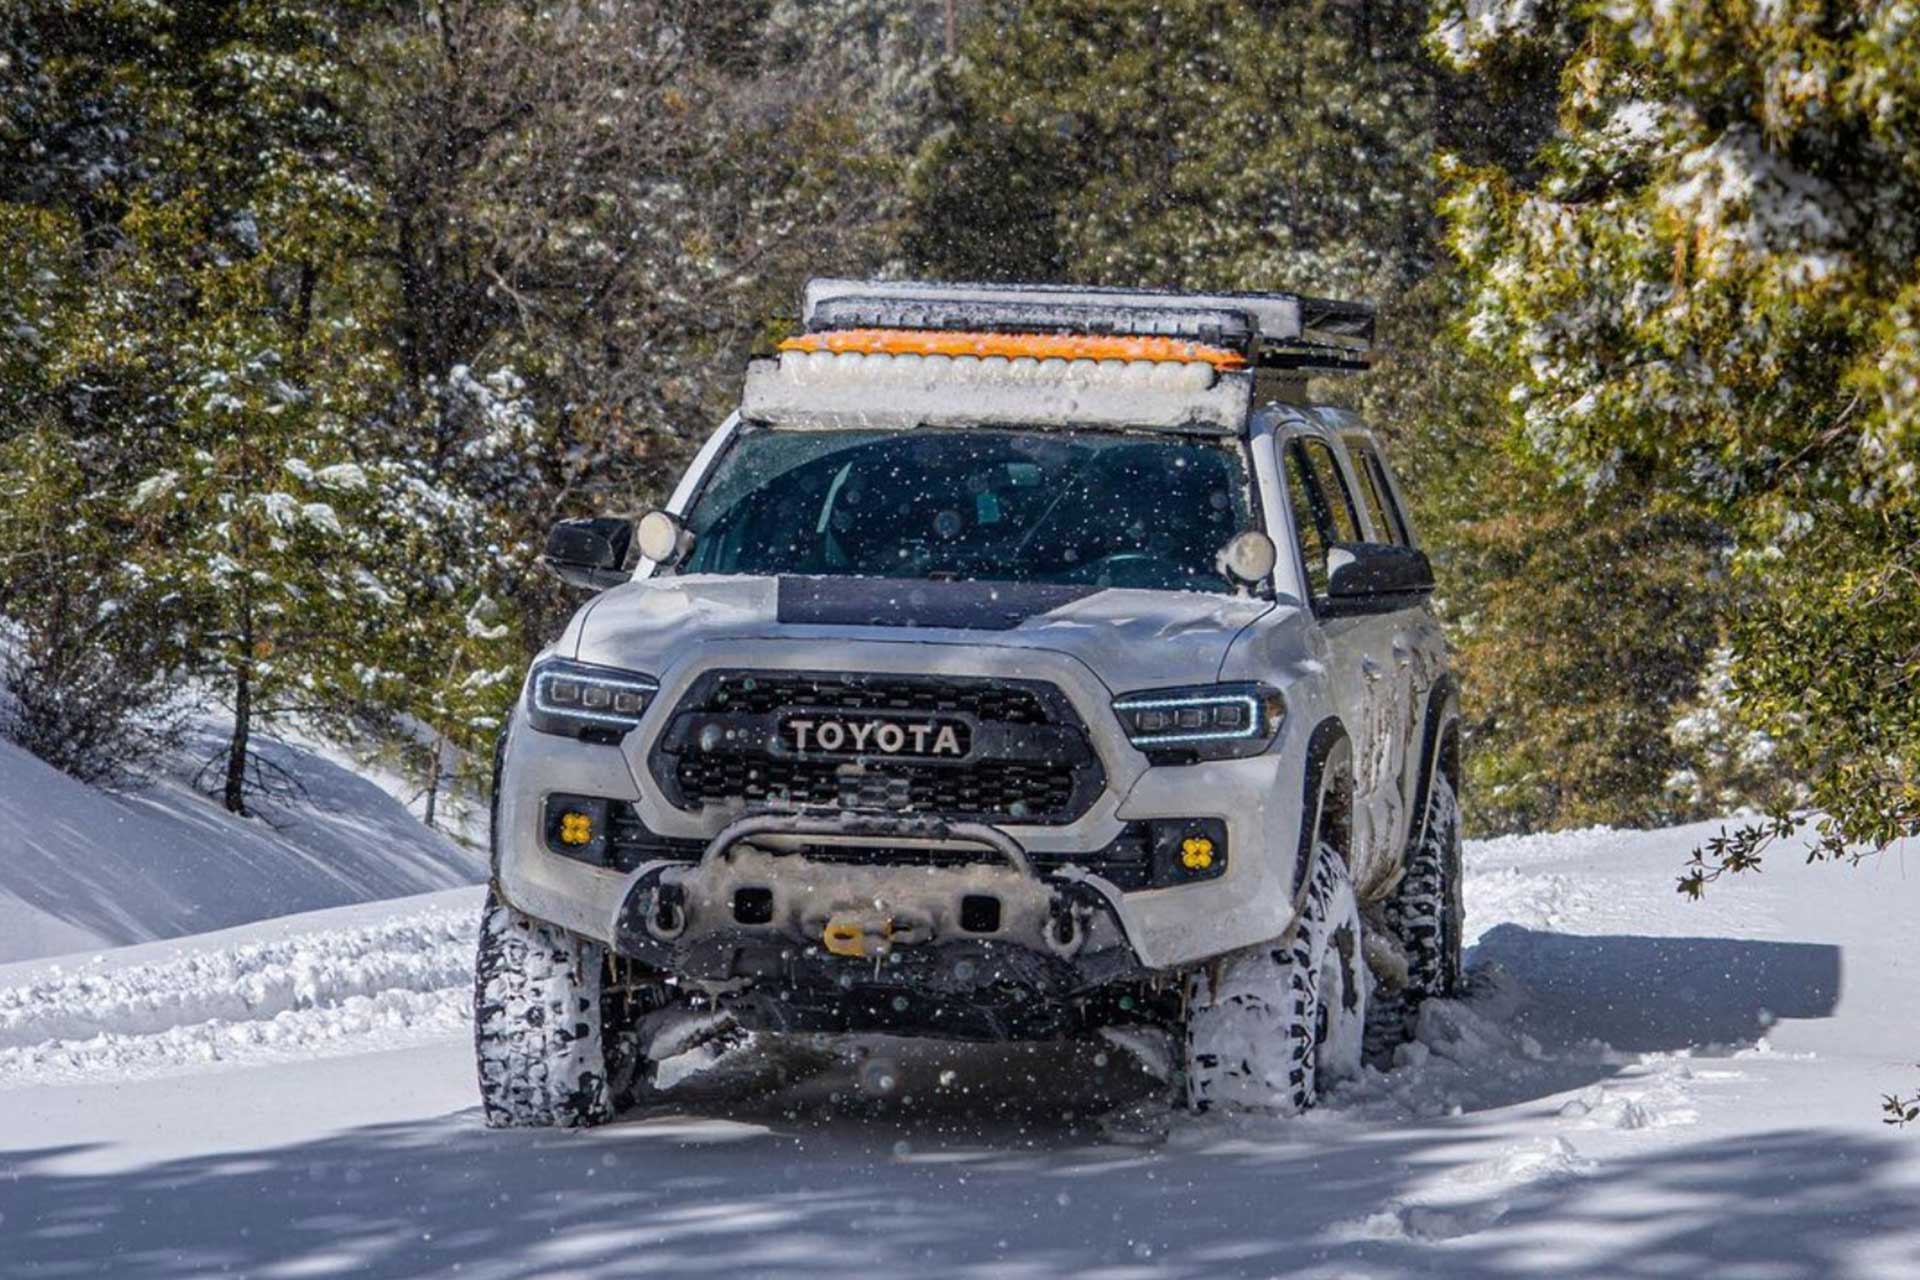 A Toyota Tacoma with RBP tires driving in snowy off-road conditions